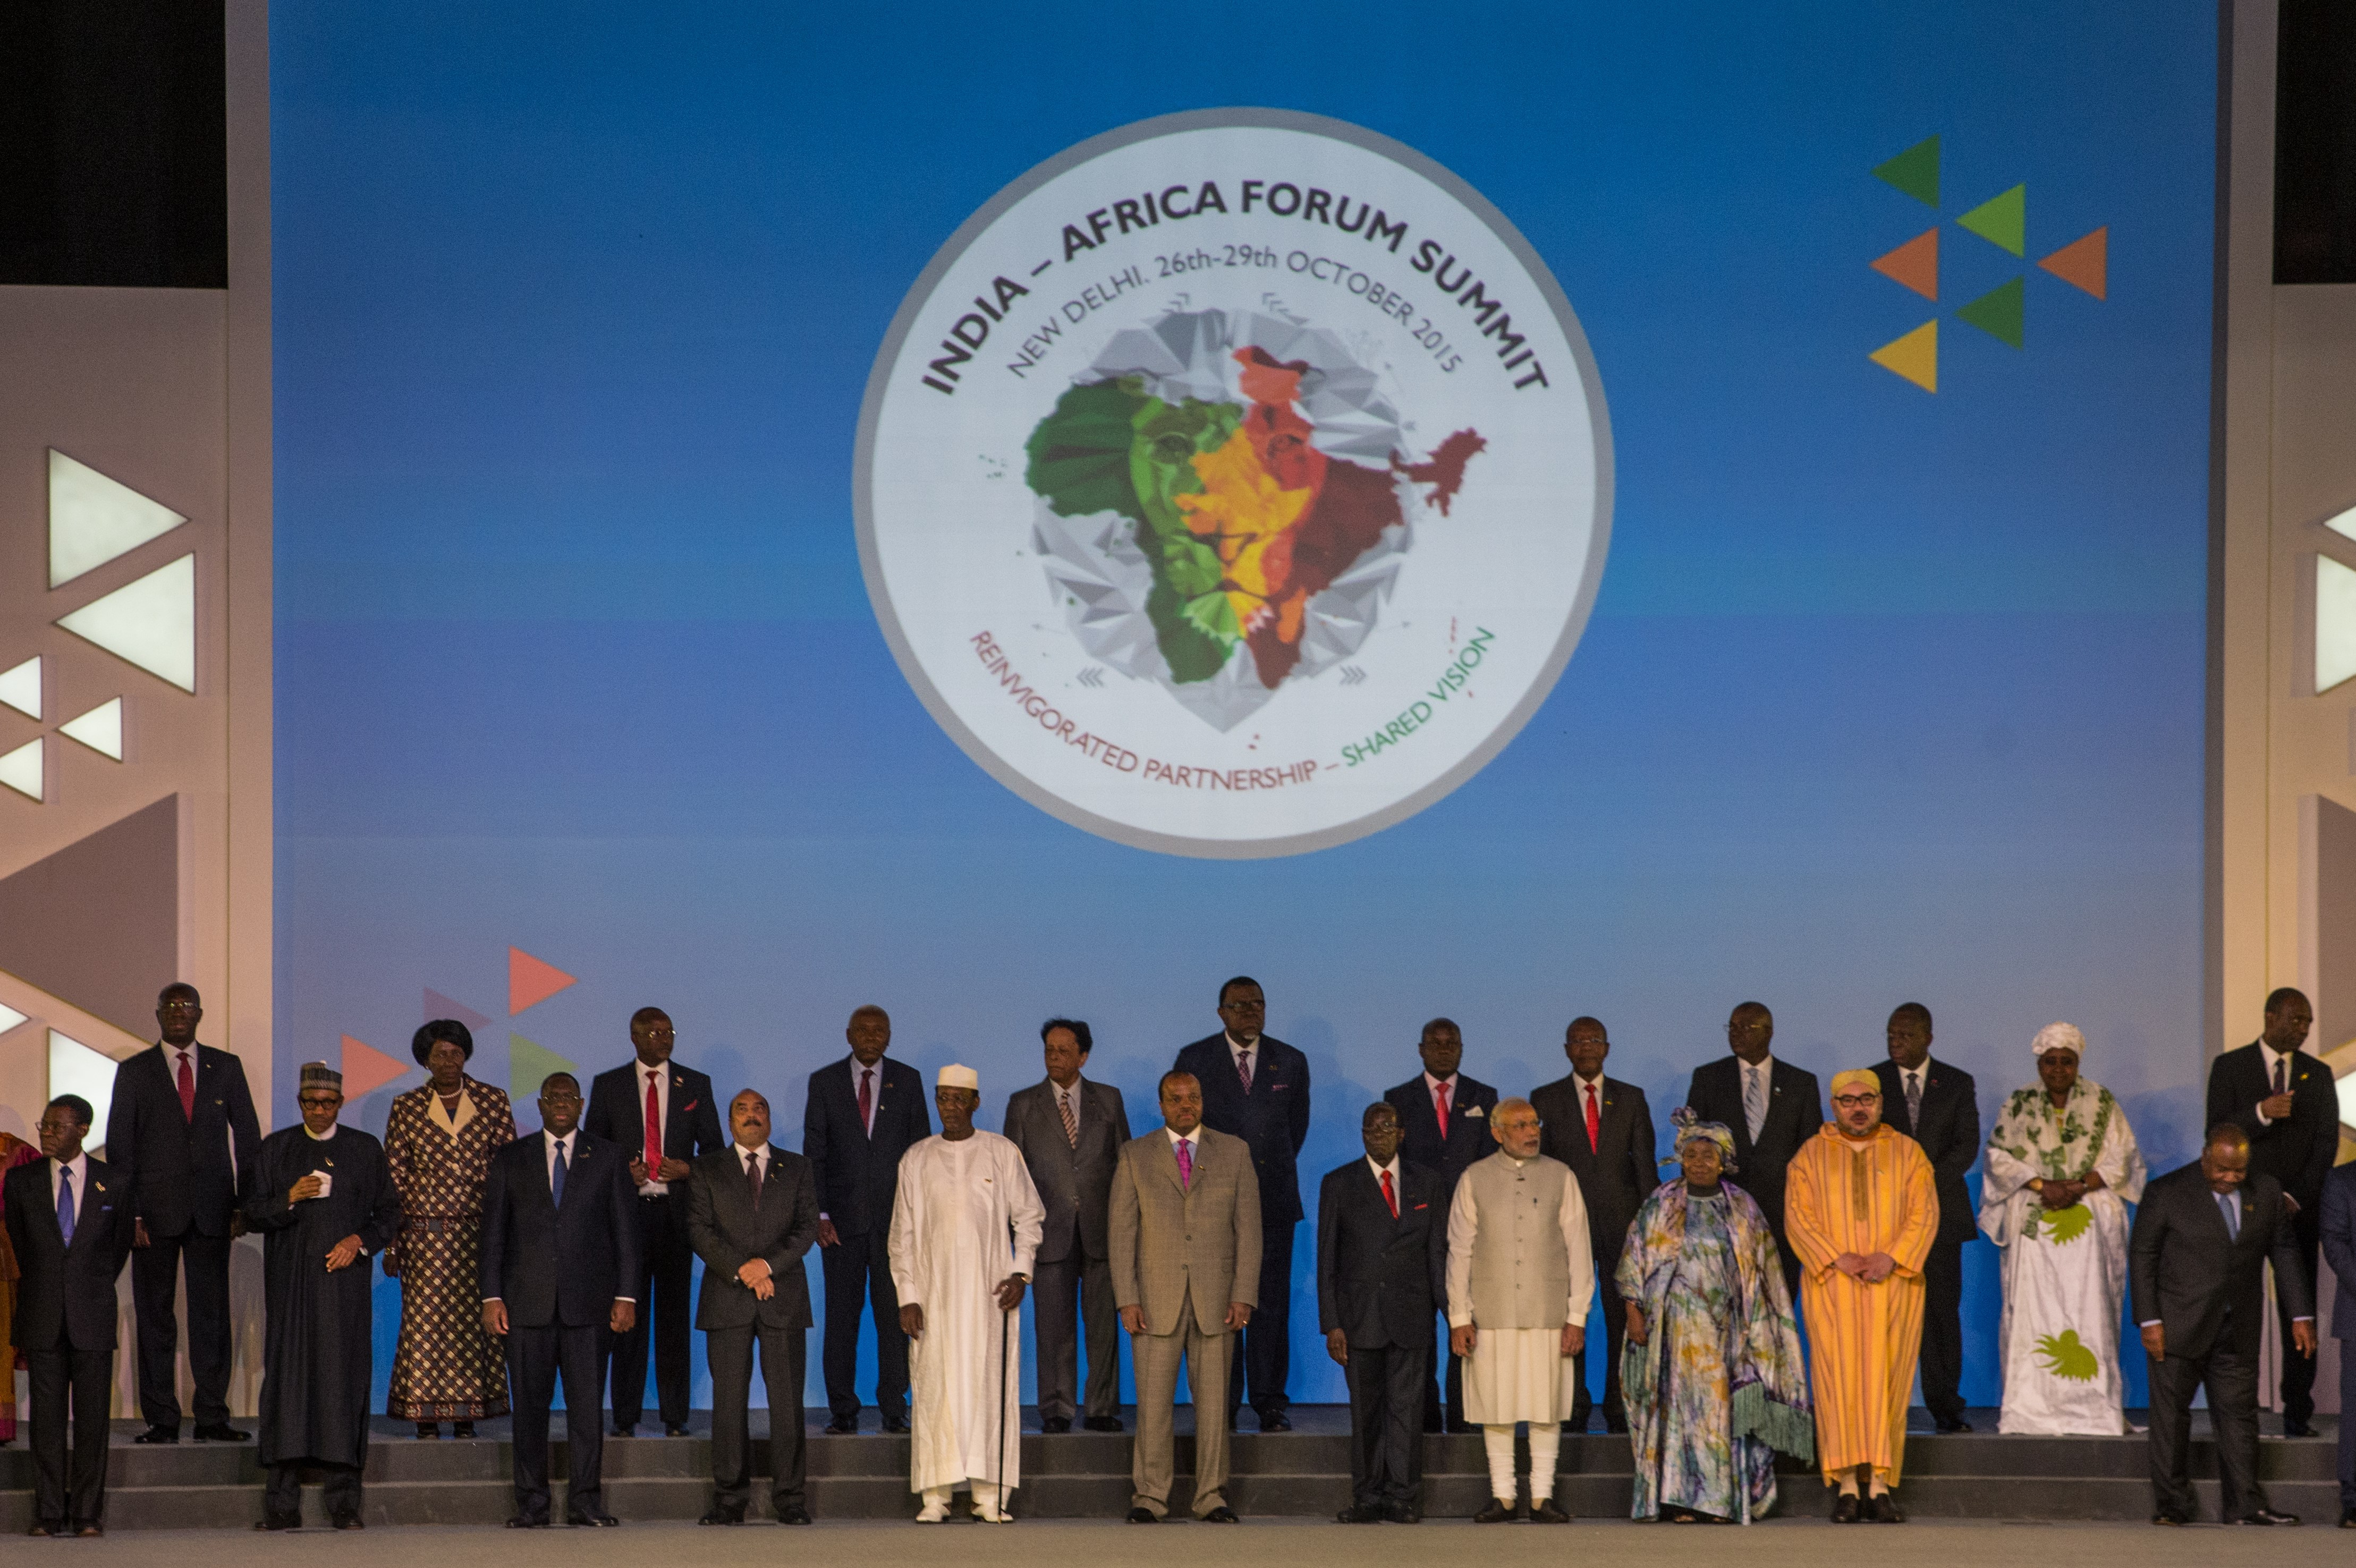 Indian Prime Minister Narendra Modi (9R) stands among other African Heads of State and representatives during a group photograph at the India-Africa Forum Summit in New Delhi on Oct. 29, 2015 (ROBERTO SCHMIDT—AFP/Getty Images)